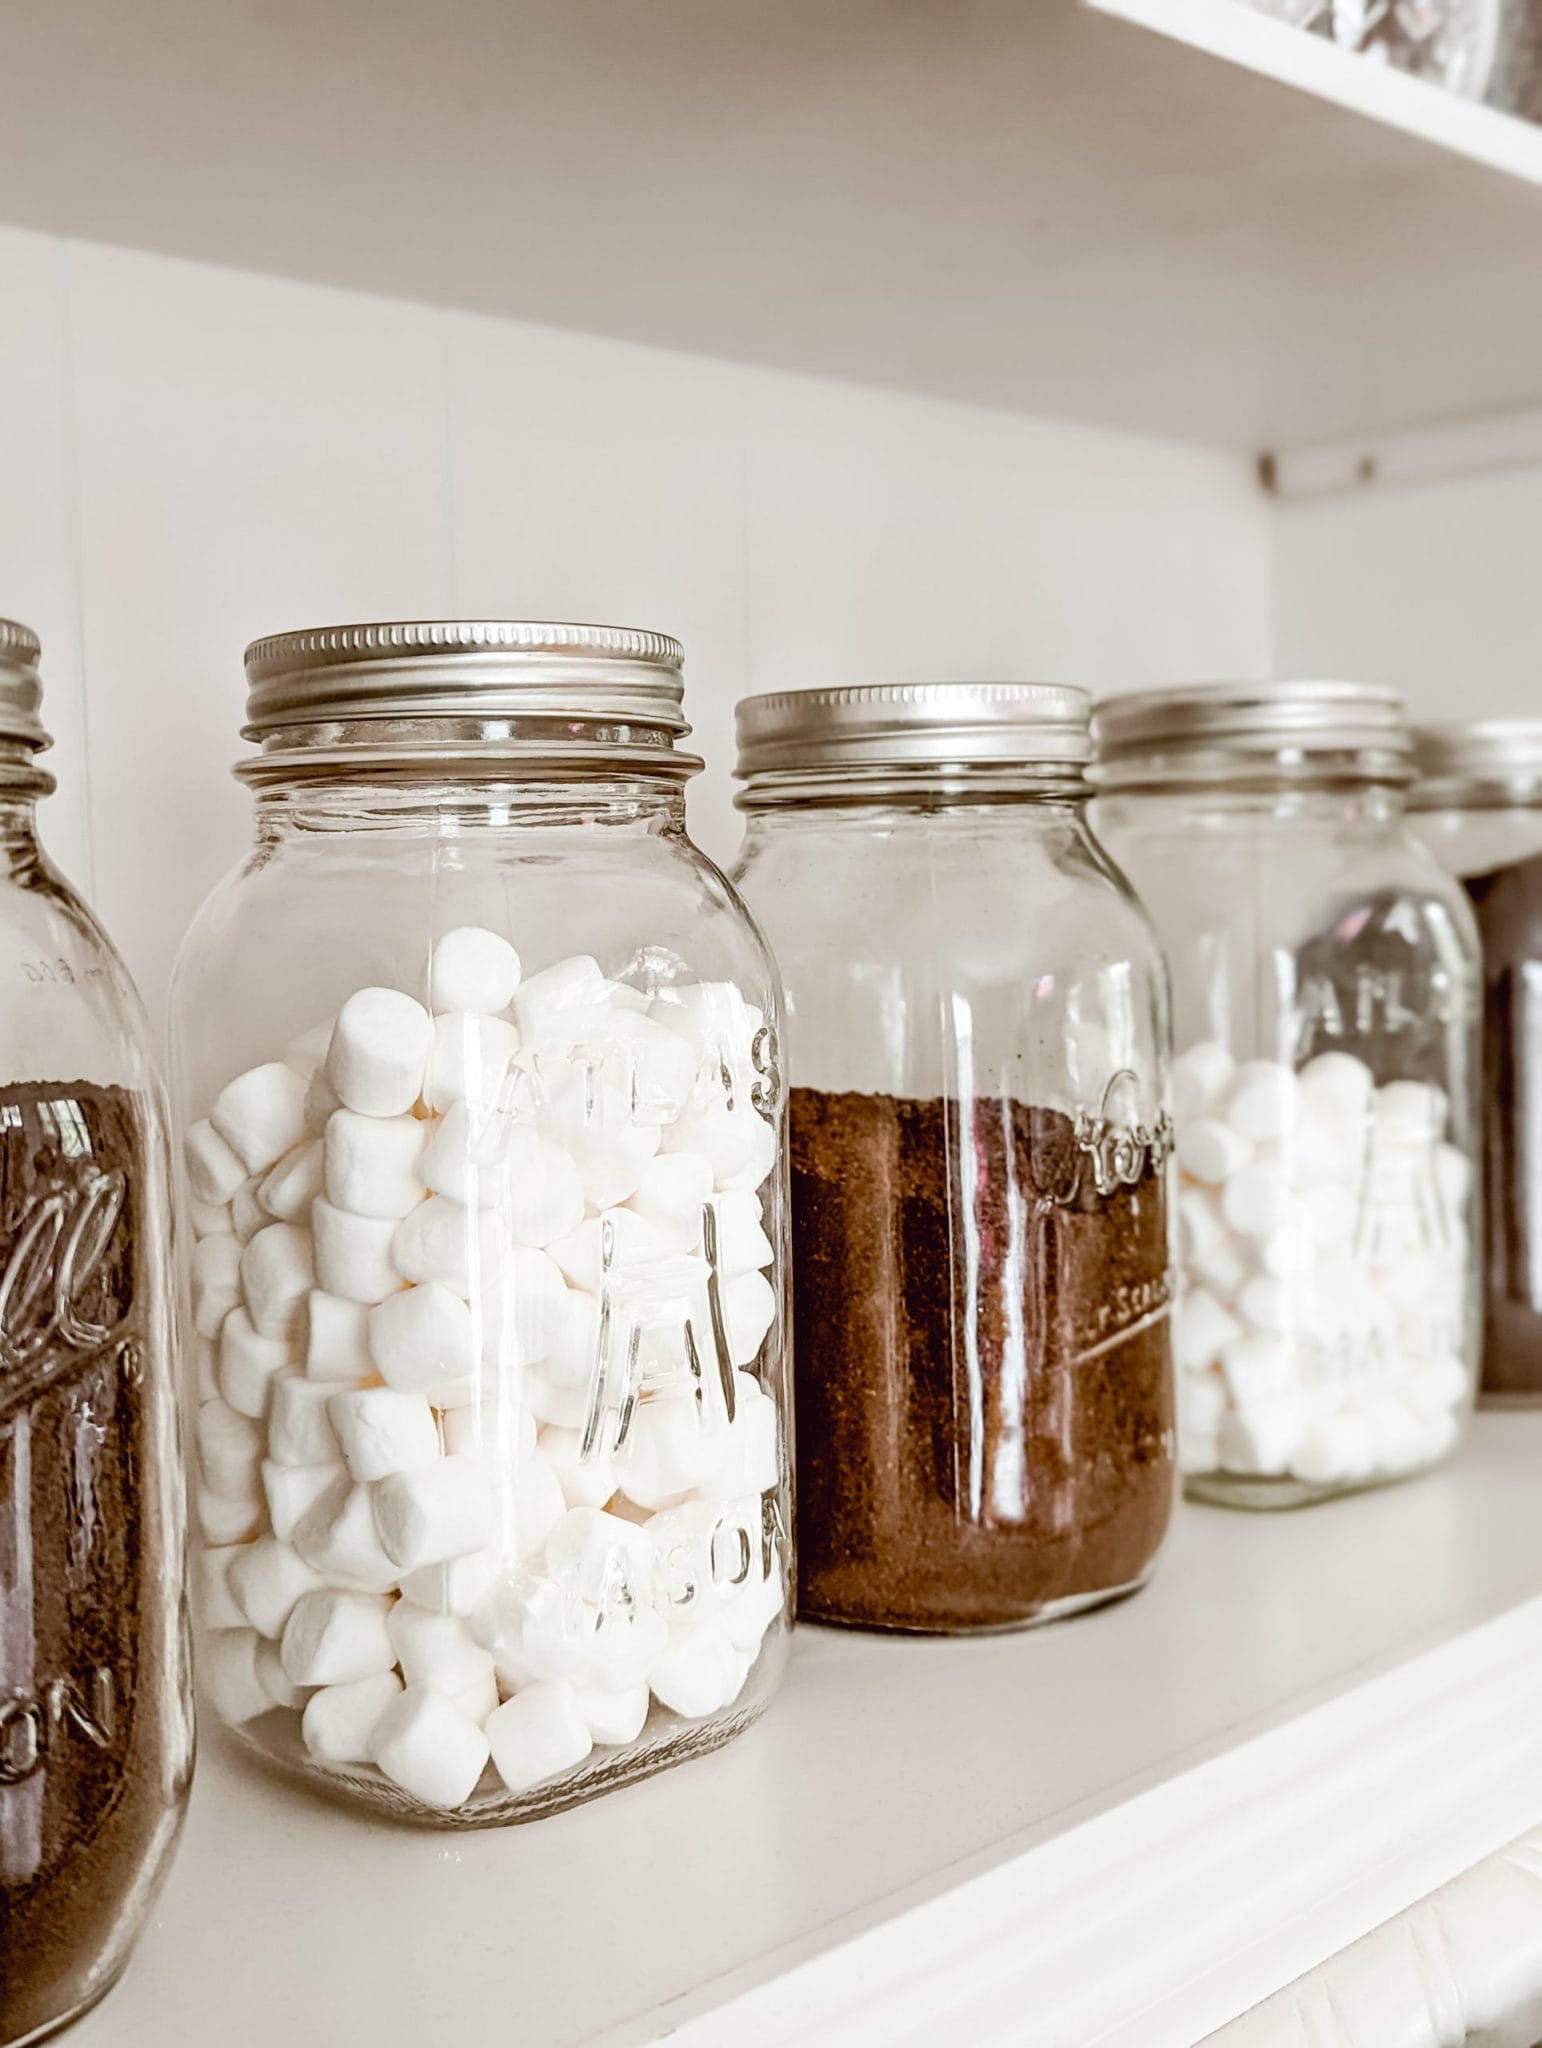 reuse glass mason jars in coffee bar as storage for coffee beans, ground coffee, and marshmallows